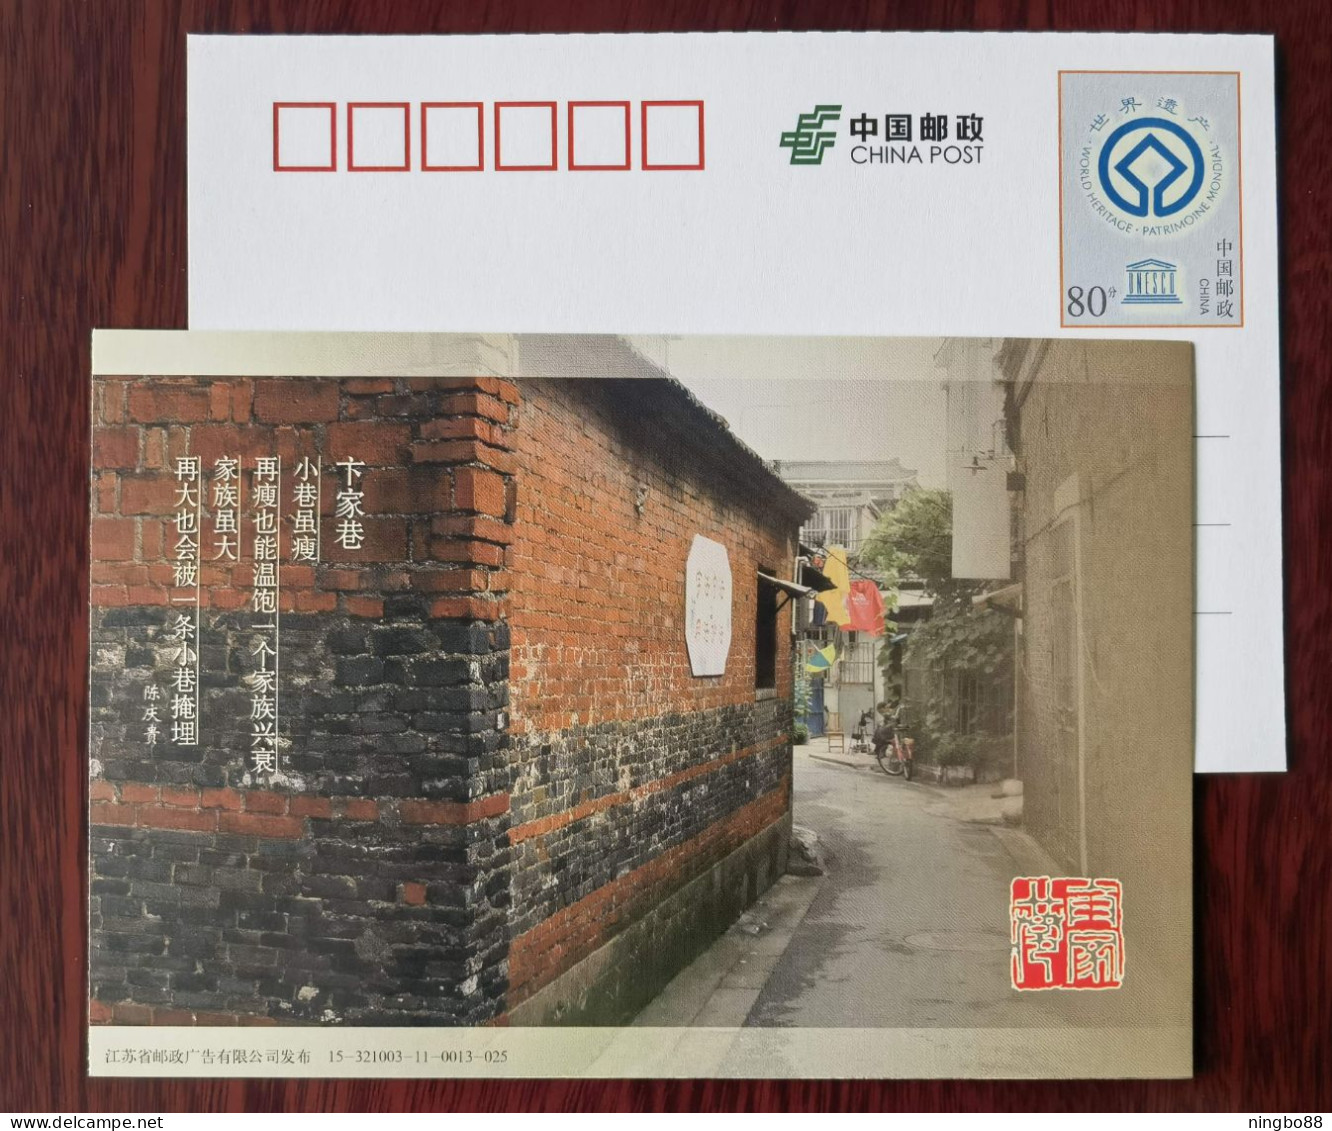 Street Bicycle Parking,bike,China 2015 Grand Canal Dongguan Ancient Ferry UNESCO World Heritage Pre-stamped Card - Radsport